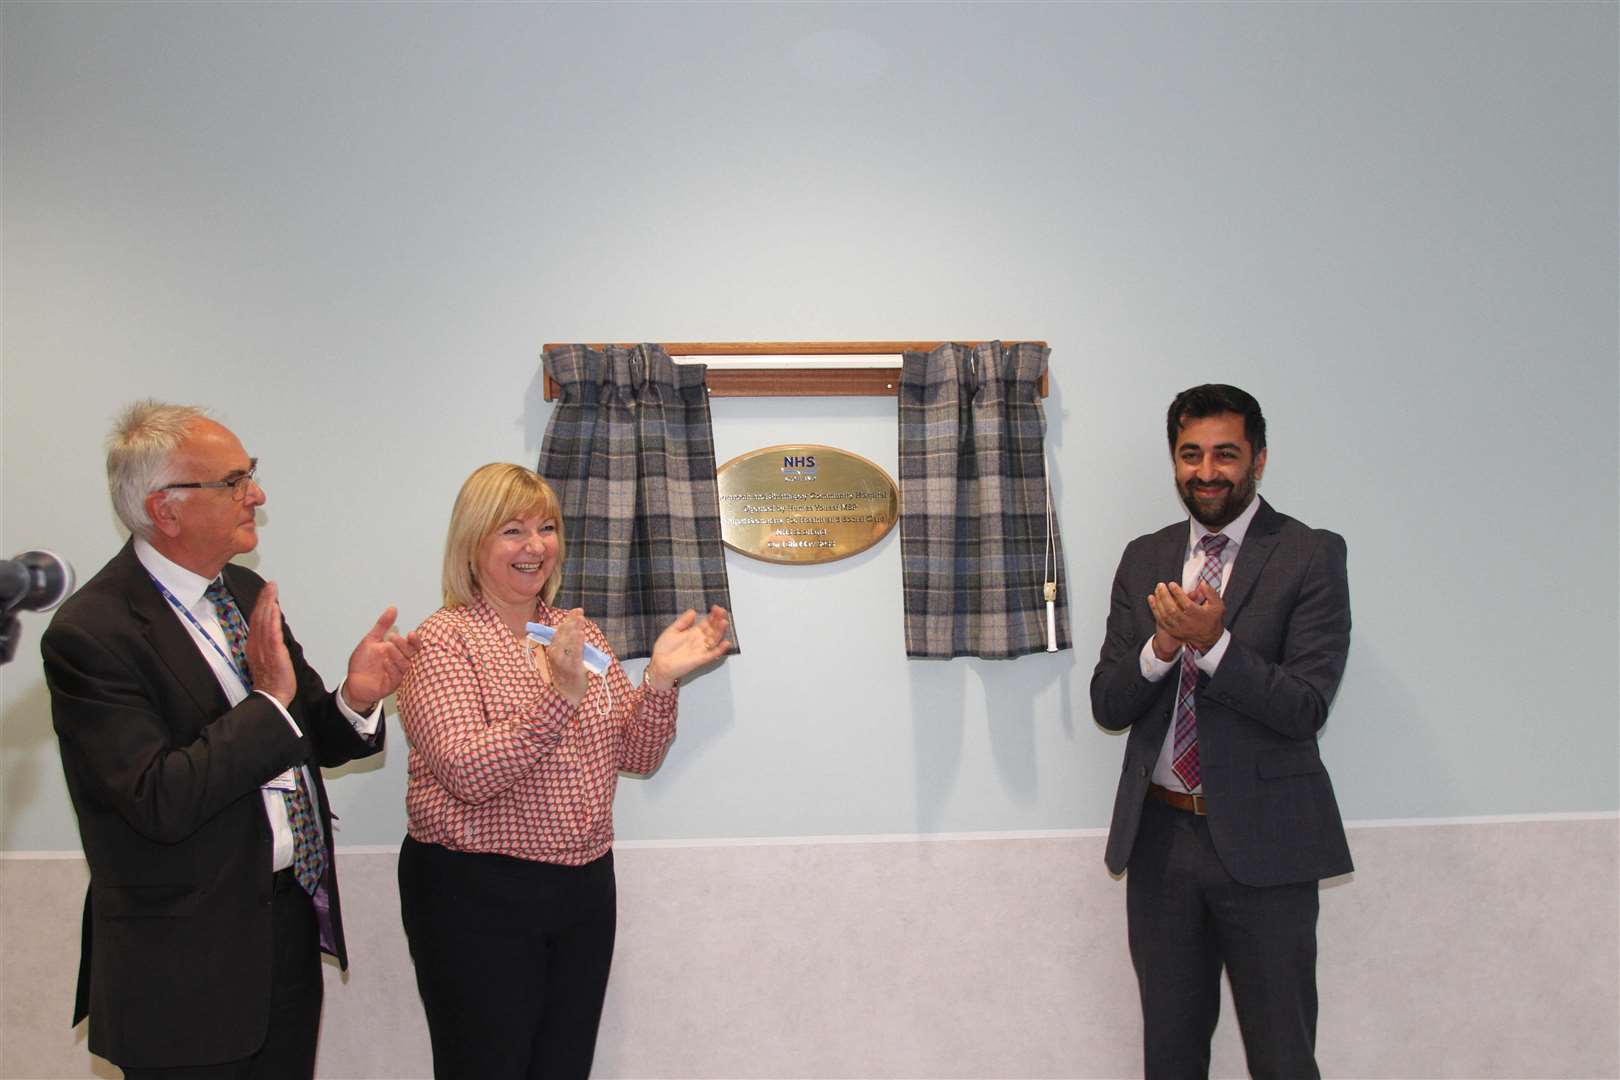 Professor Boyd Robertson, NHS Highland chairman, and Pam Dudek, NHS Highland chief executive, applaud after Health Secretary Humza Yousaf officially opens the hospital at Dalfaber in Aviemore.